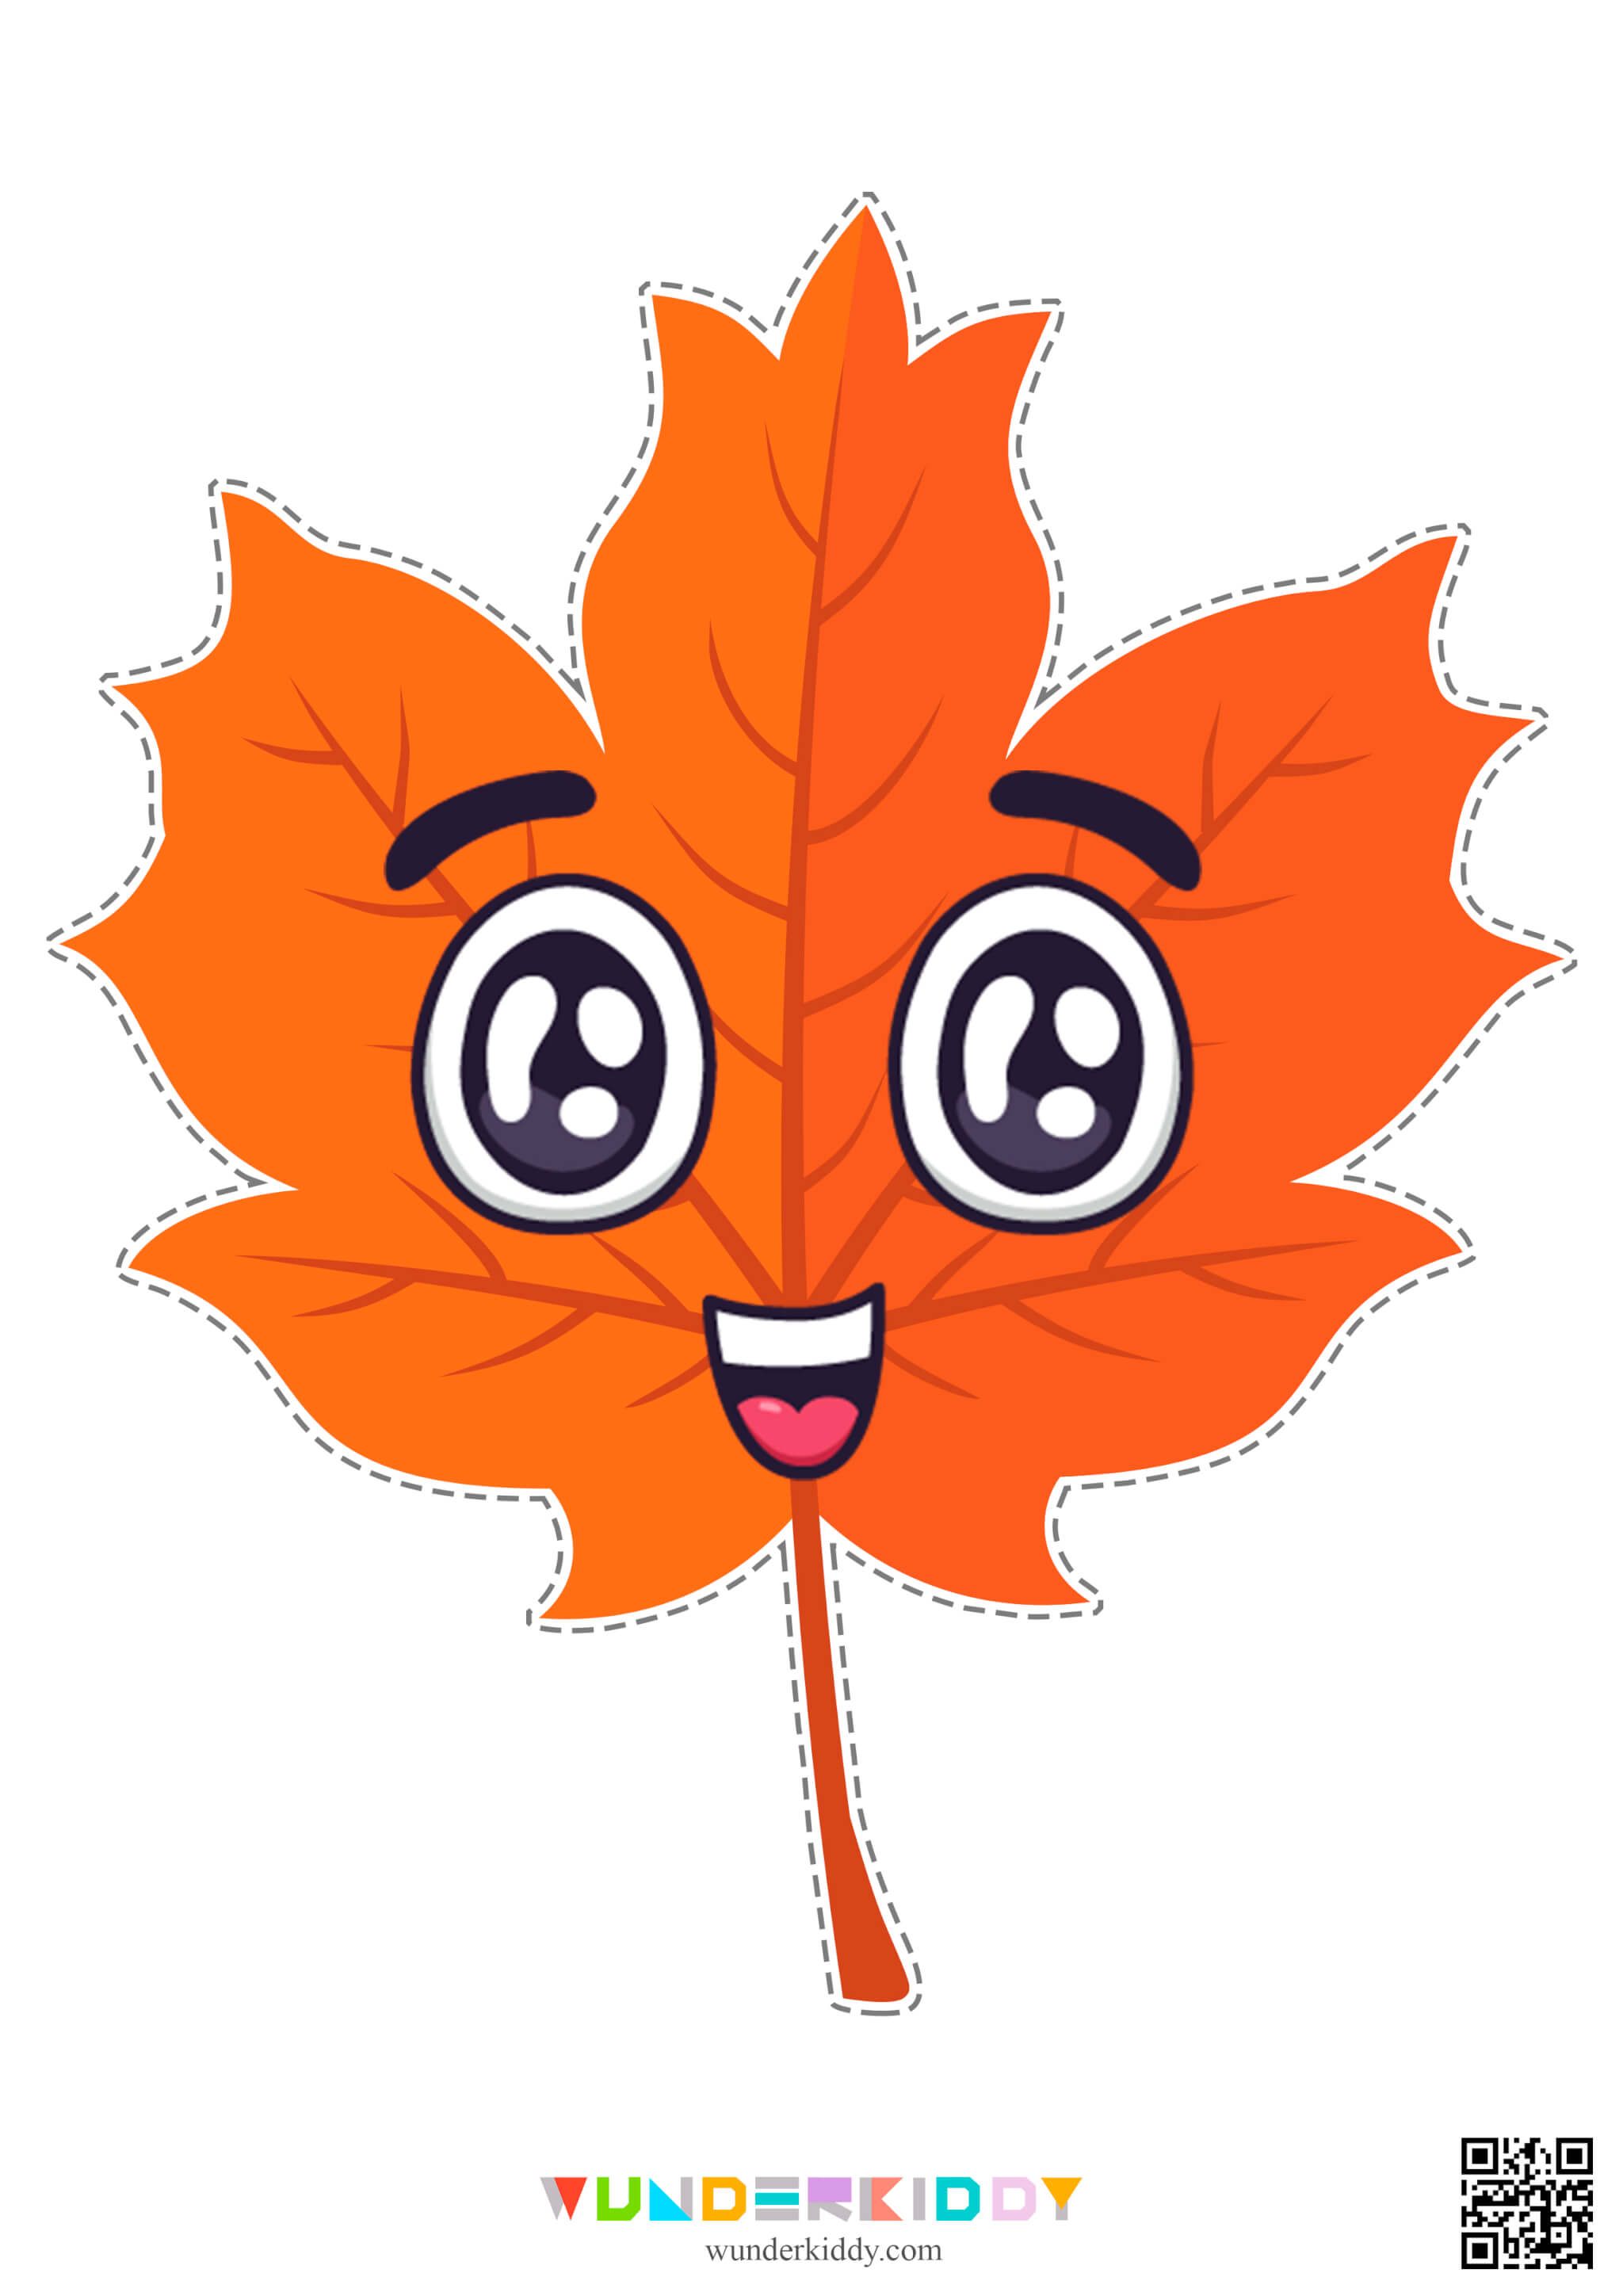 Activity sheet «Funny autumn leaves» - Image 4